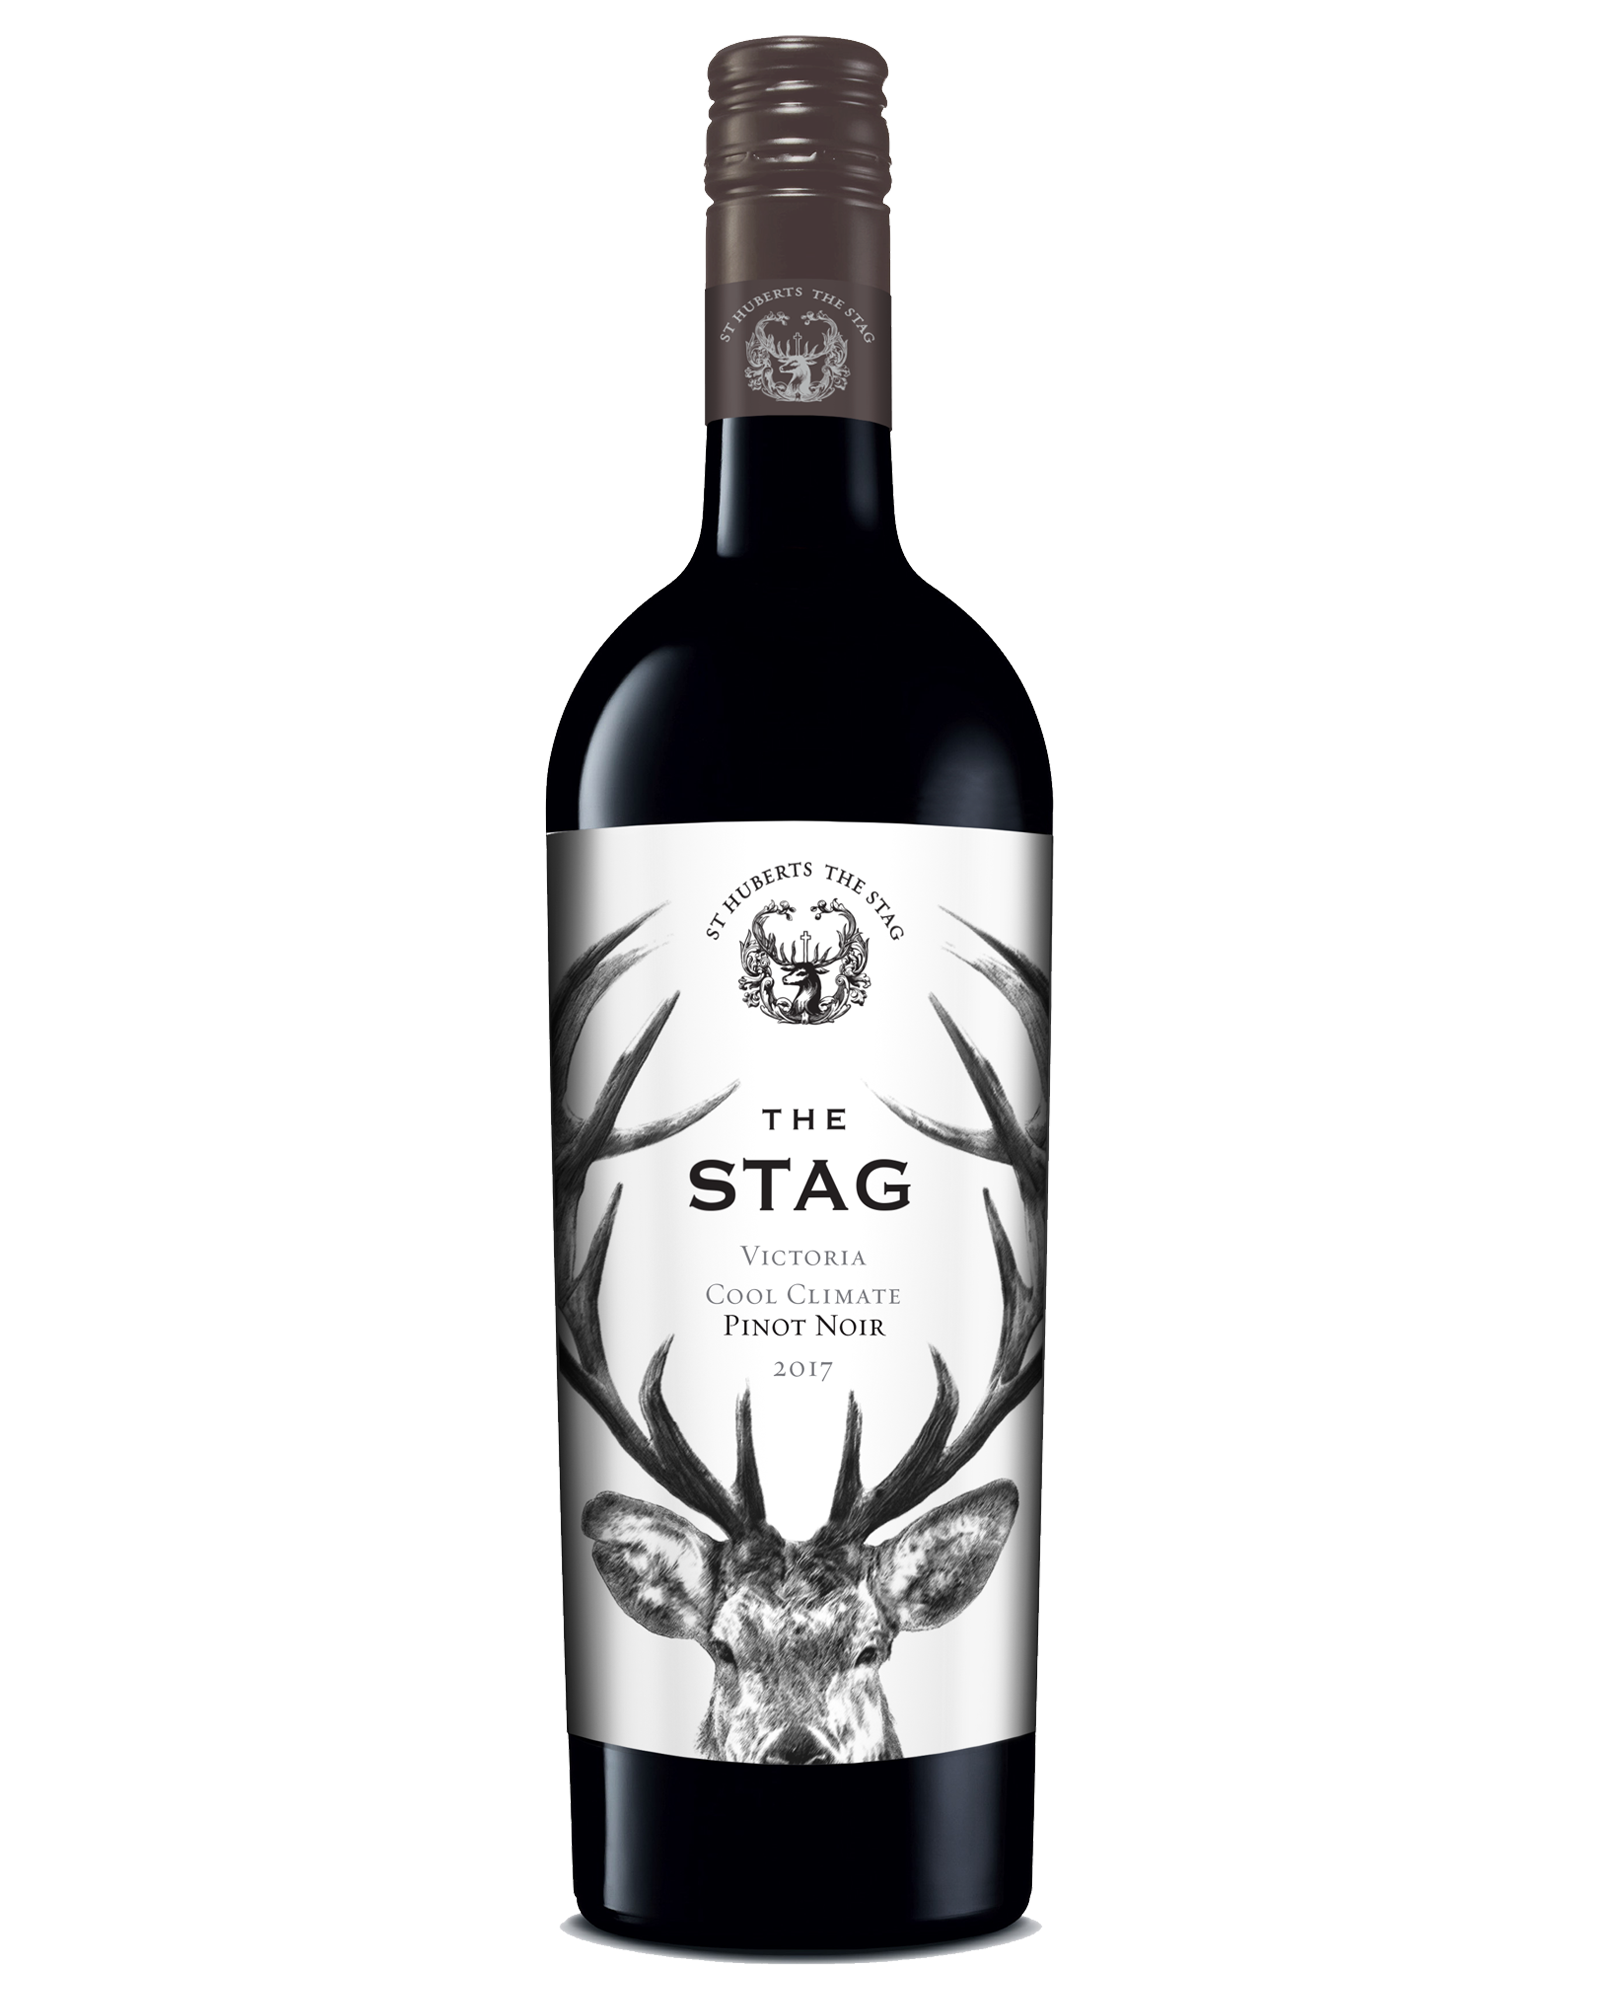 St Huberts The Stag Victorian Pinot Noir